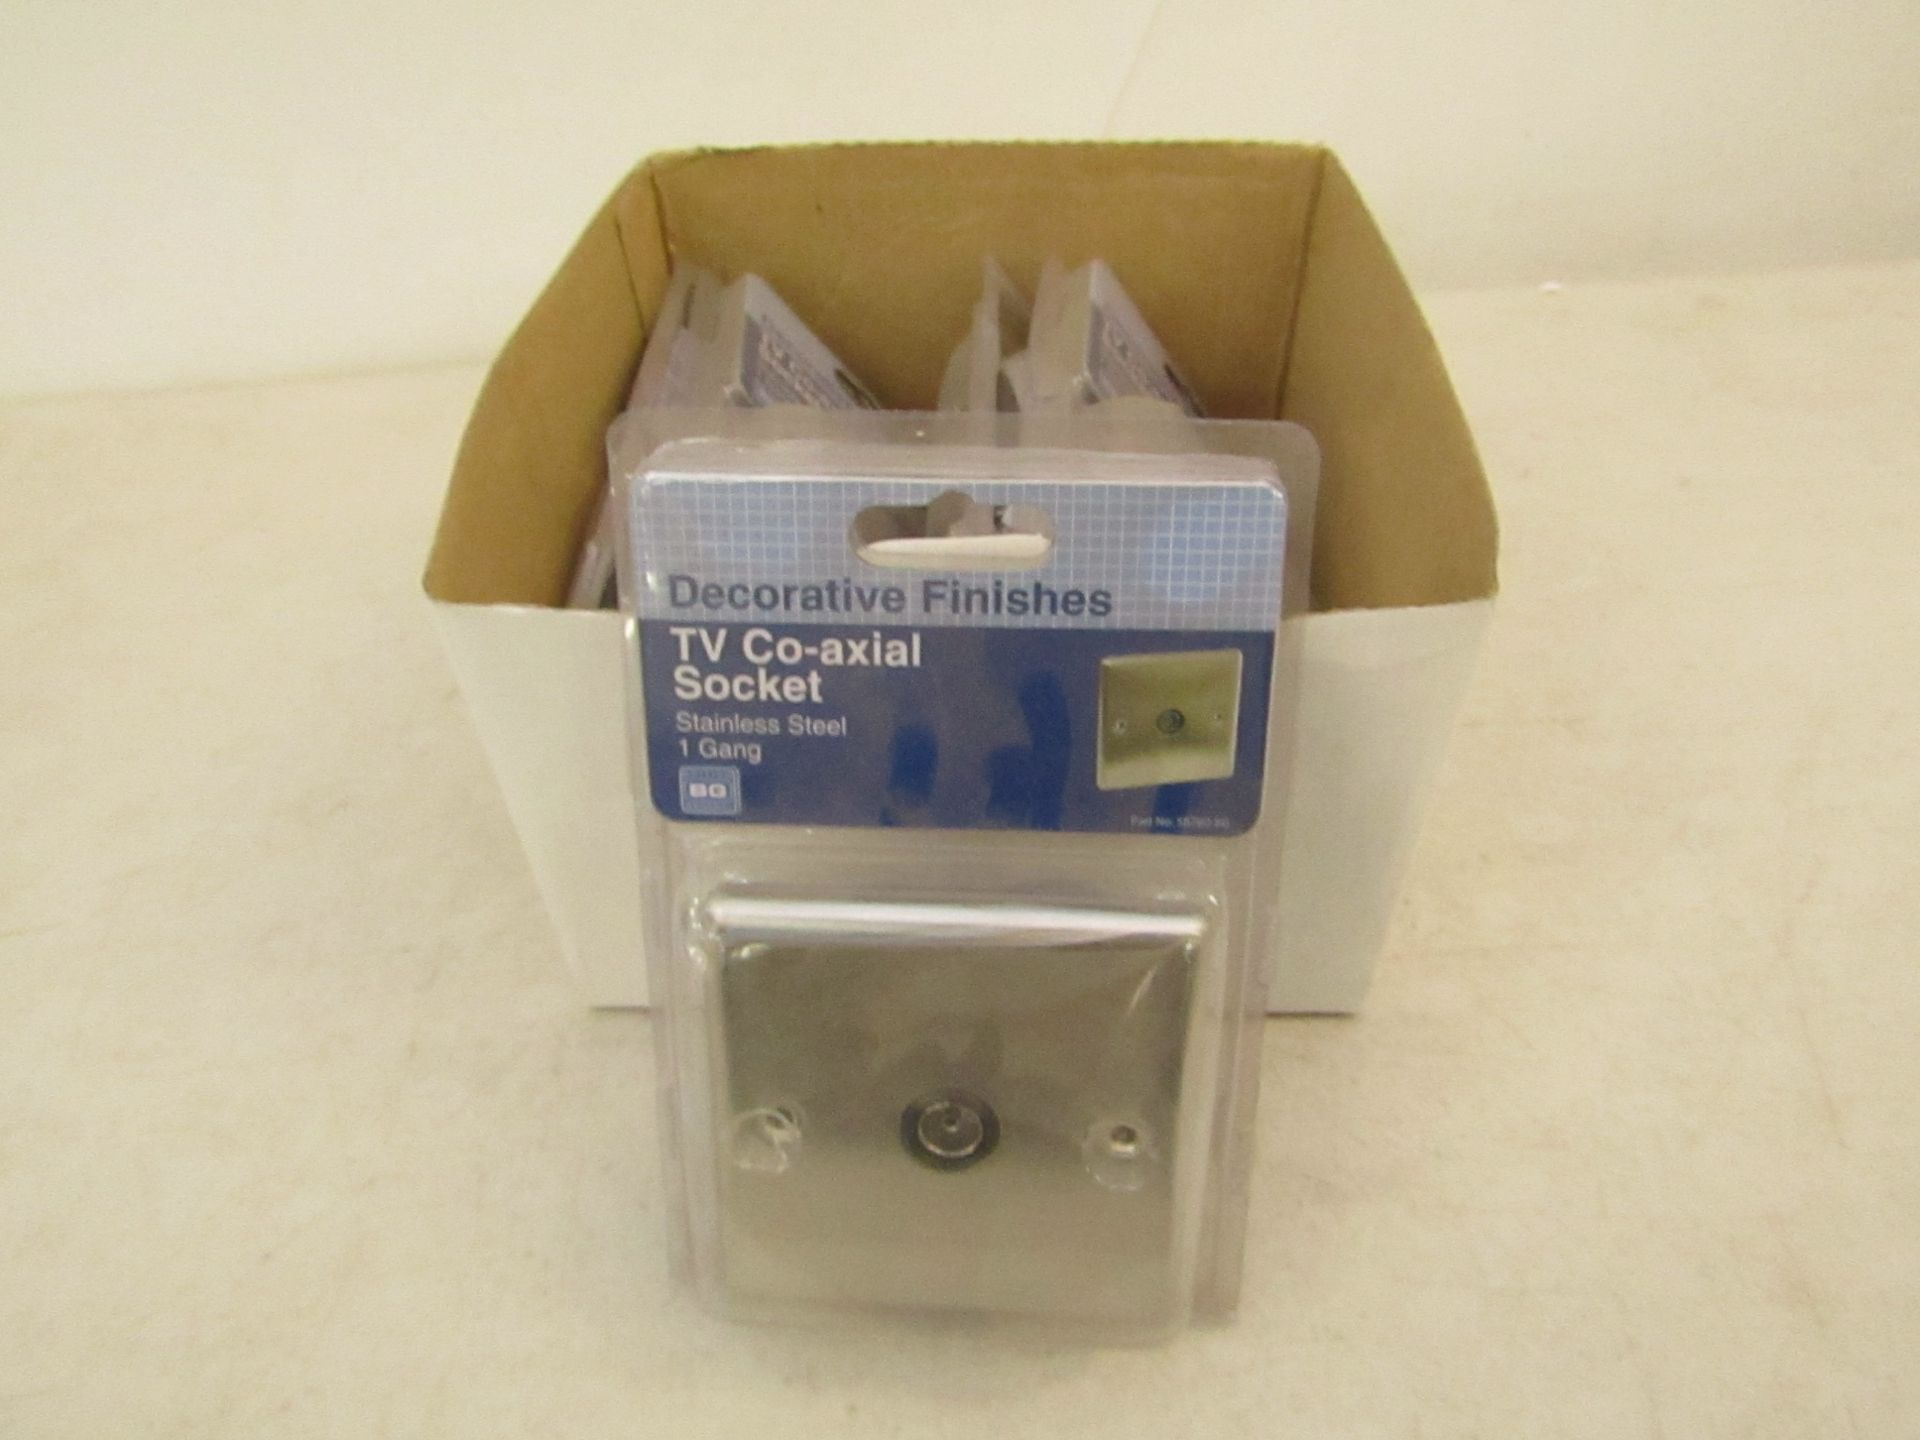 Box of 5x Reflex chrome co-axial 1-gang+sockets, new in packaging.